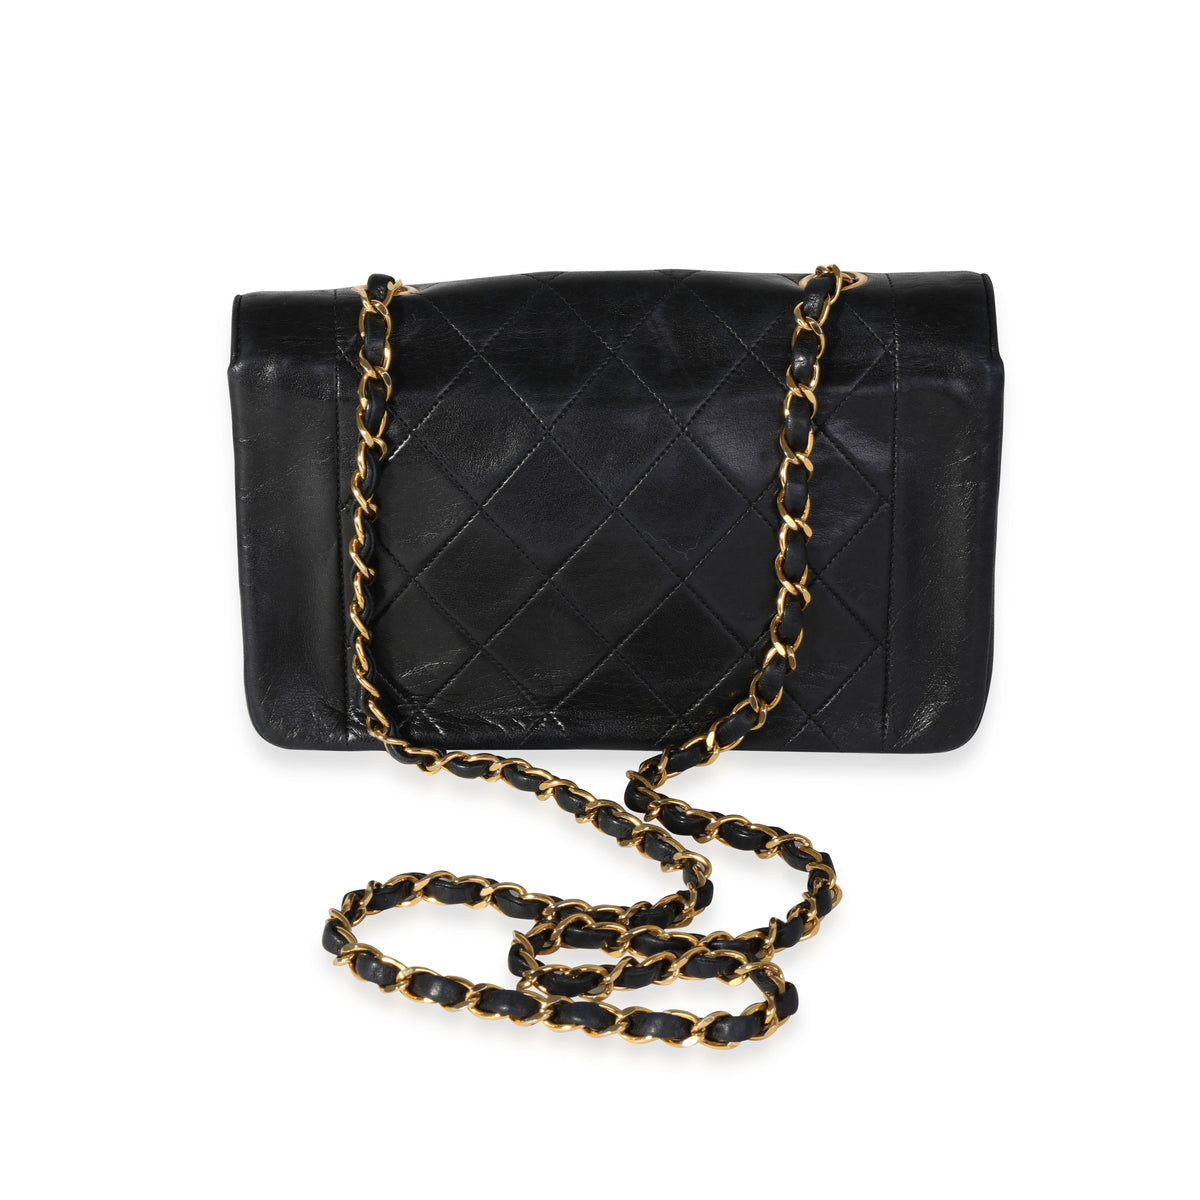 Chanel Vintage Red Quilted Lambskin Diana Flap Bag, myGemma